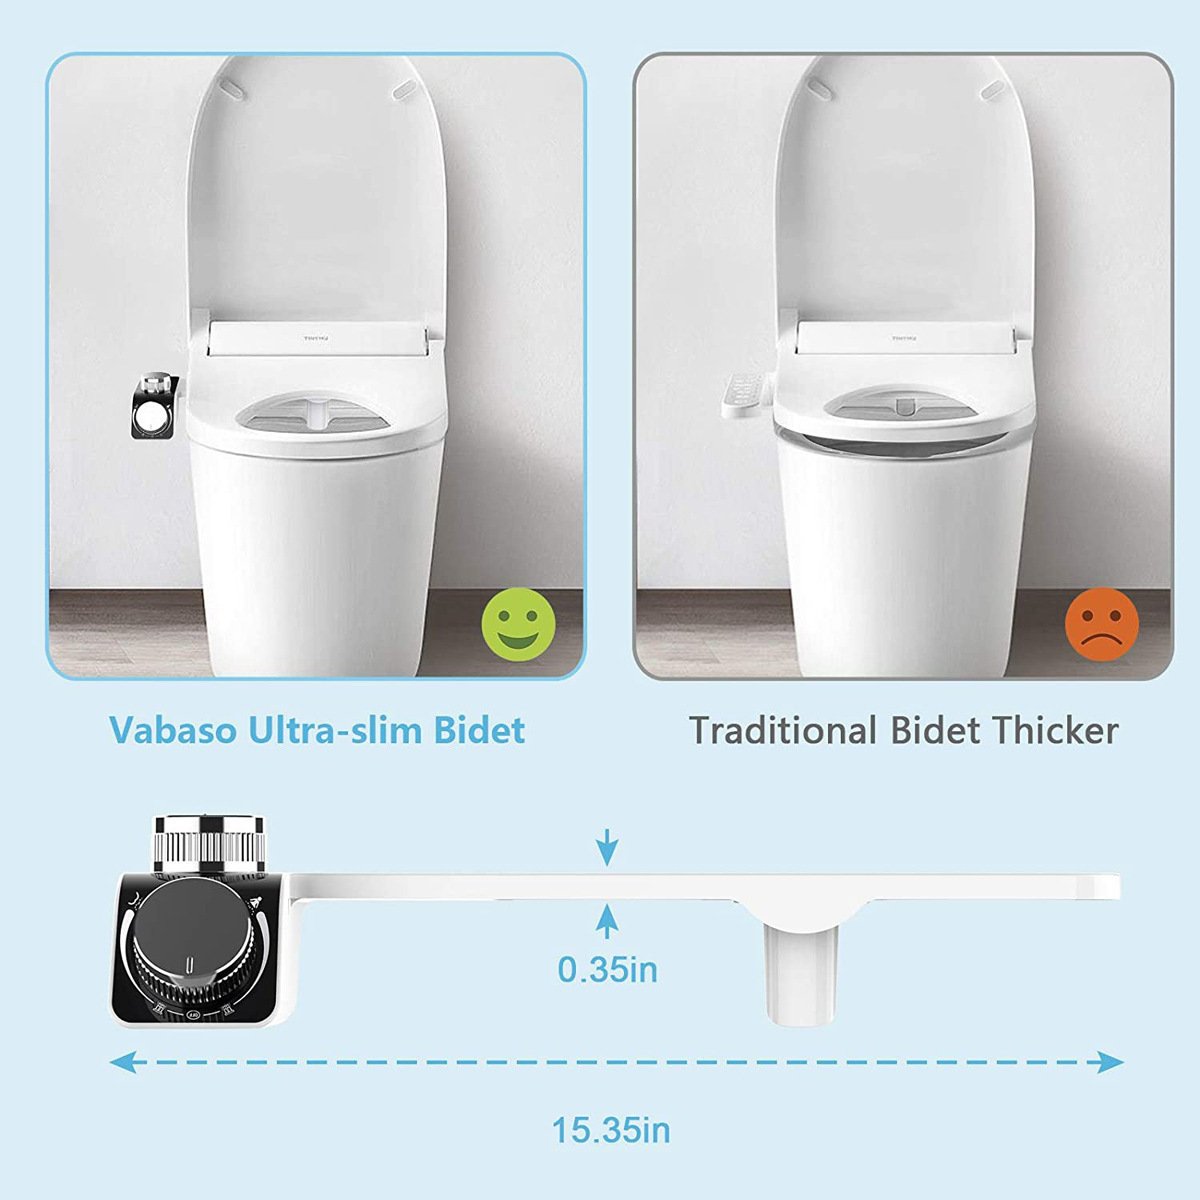 🔥NEW YEAR SALE - SAVE 50%🎄Smart Toilet Seat Hot/Cold Dual Jet Flusher